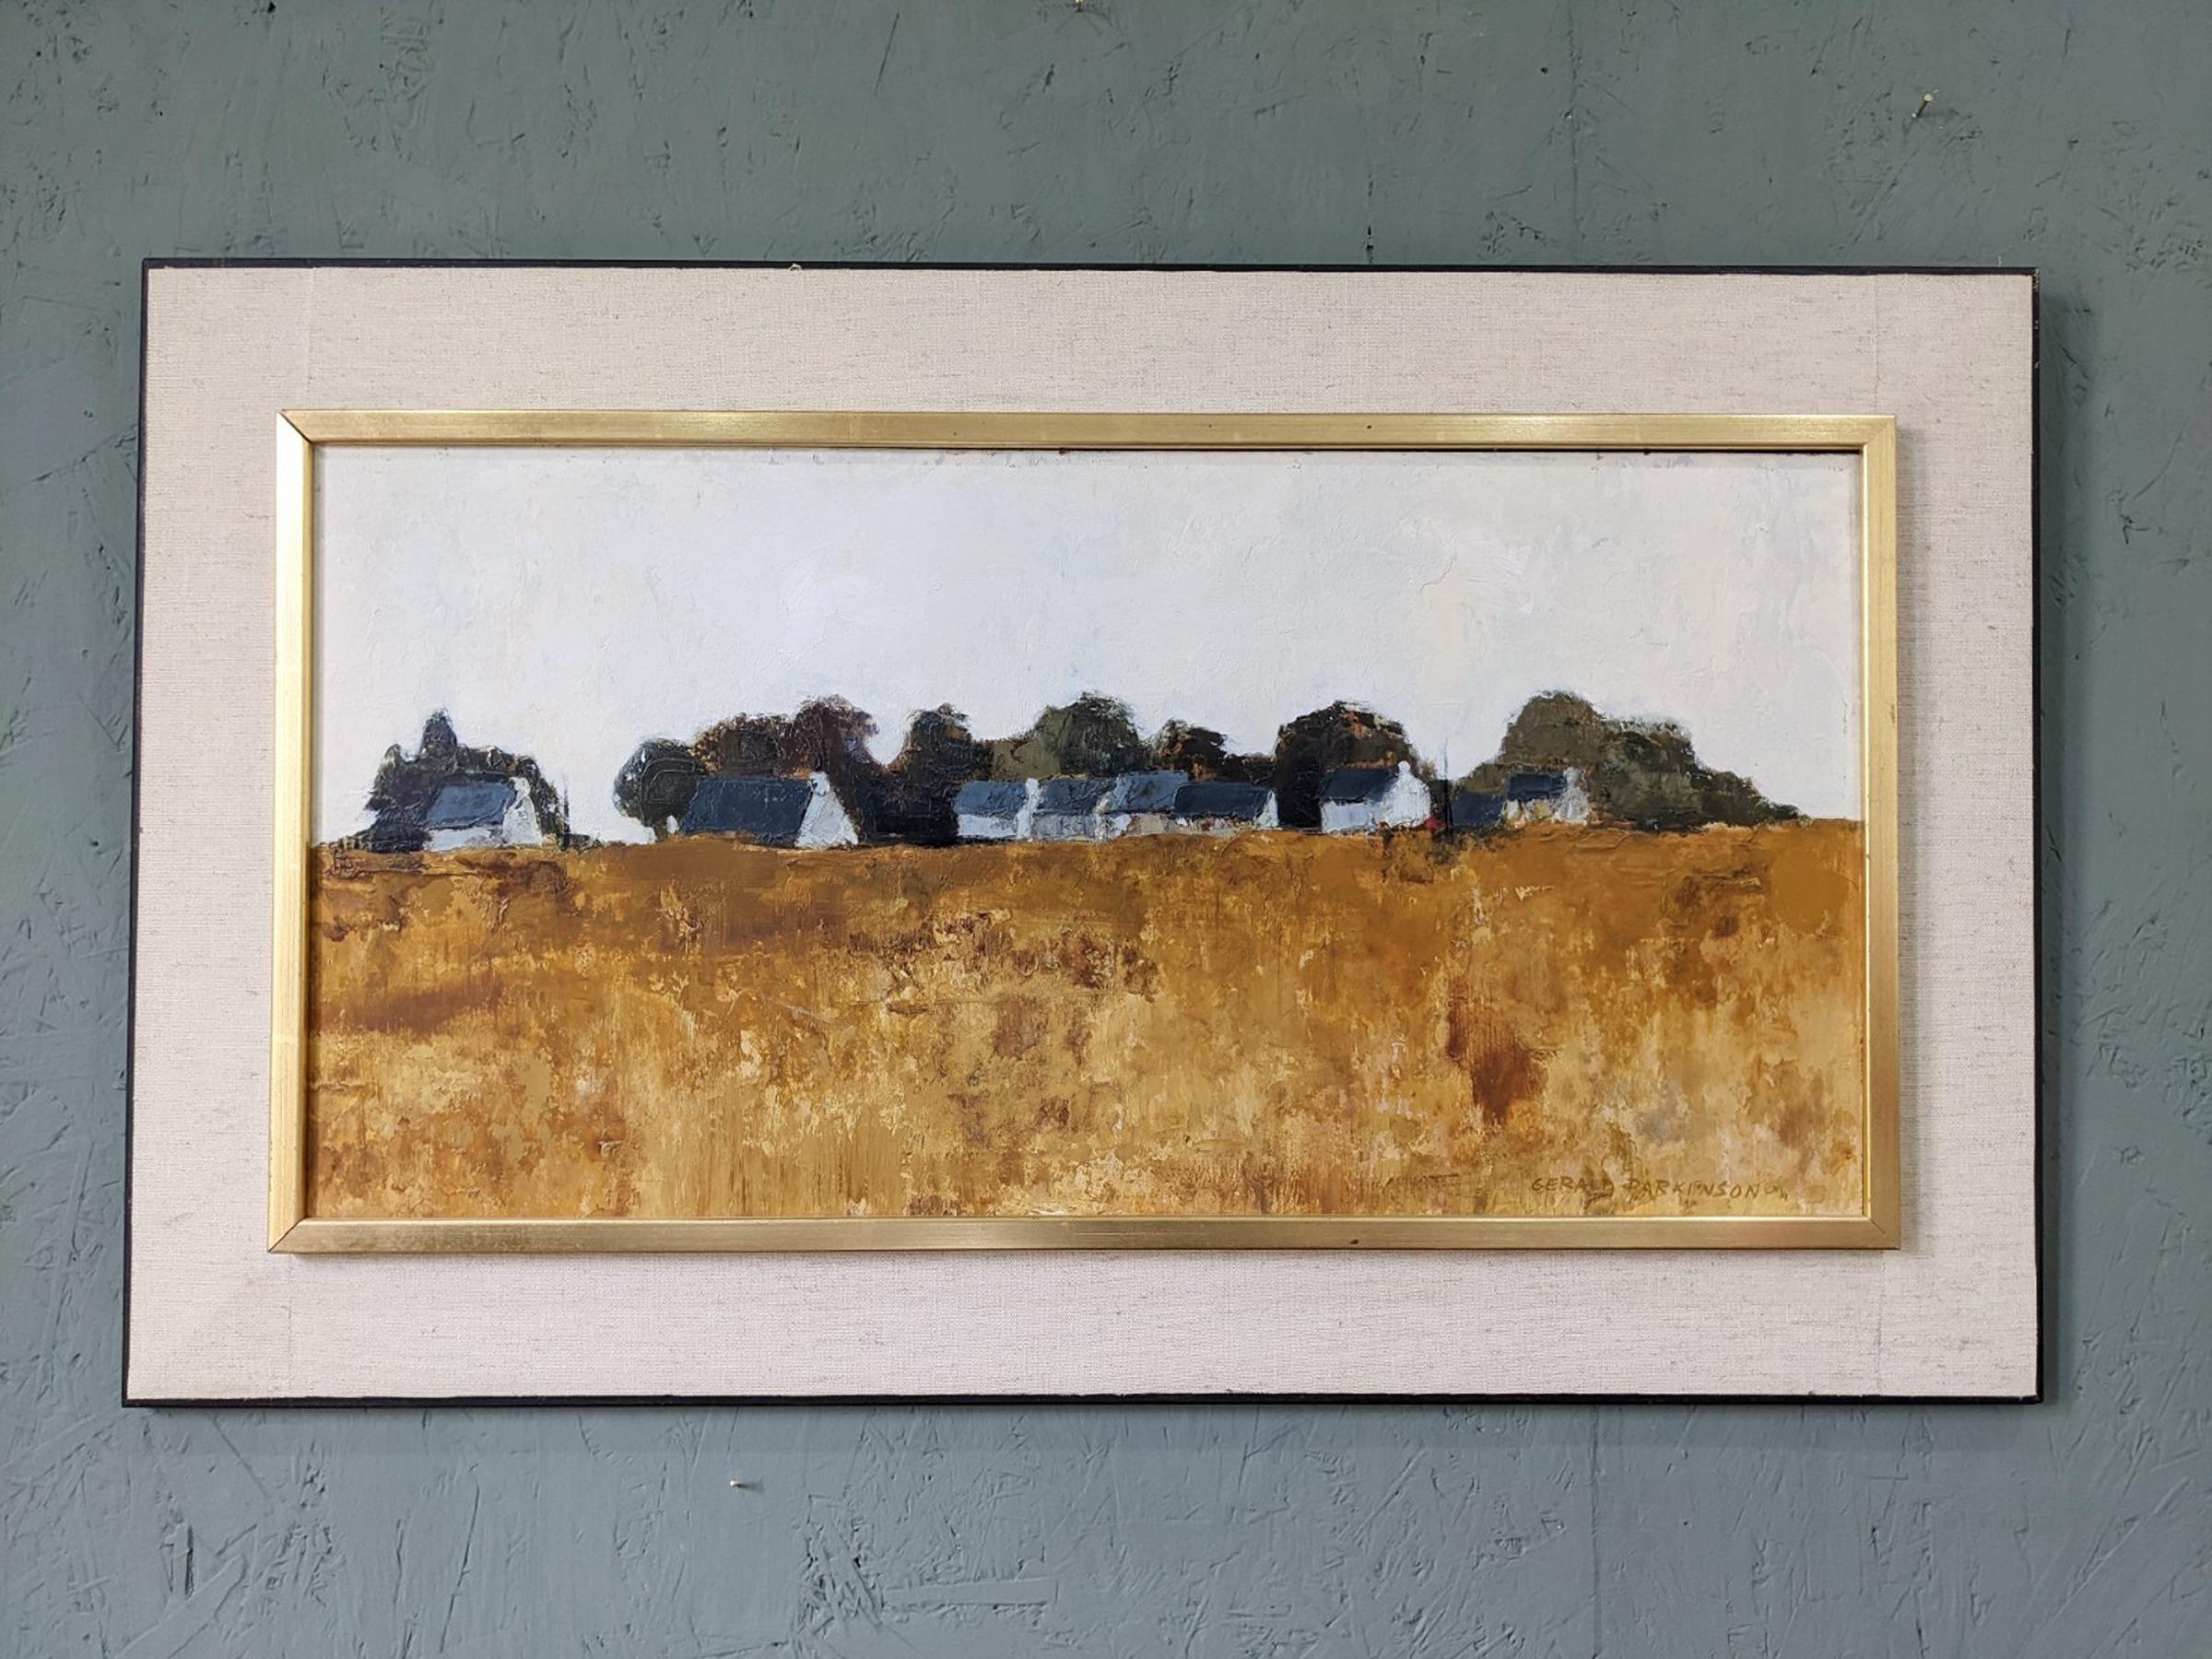 FARMHOUSES
Size: 45 x 75 cm (including frame)
Oil on Board

 A long and restful mid century modernist landscape composition, executed in oil onto board.

This panoramic and scenic view of nature presents a row of farmhouses surrounded by lush